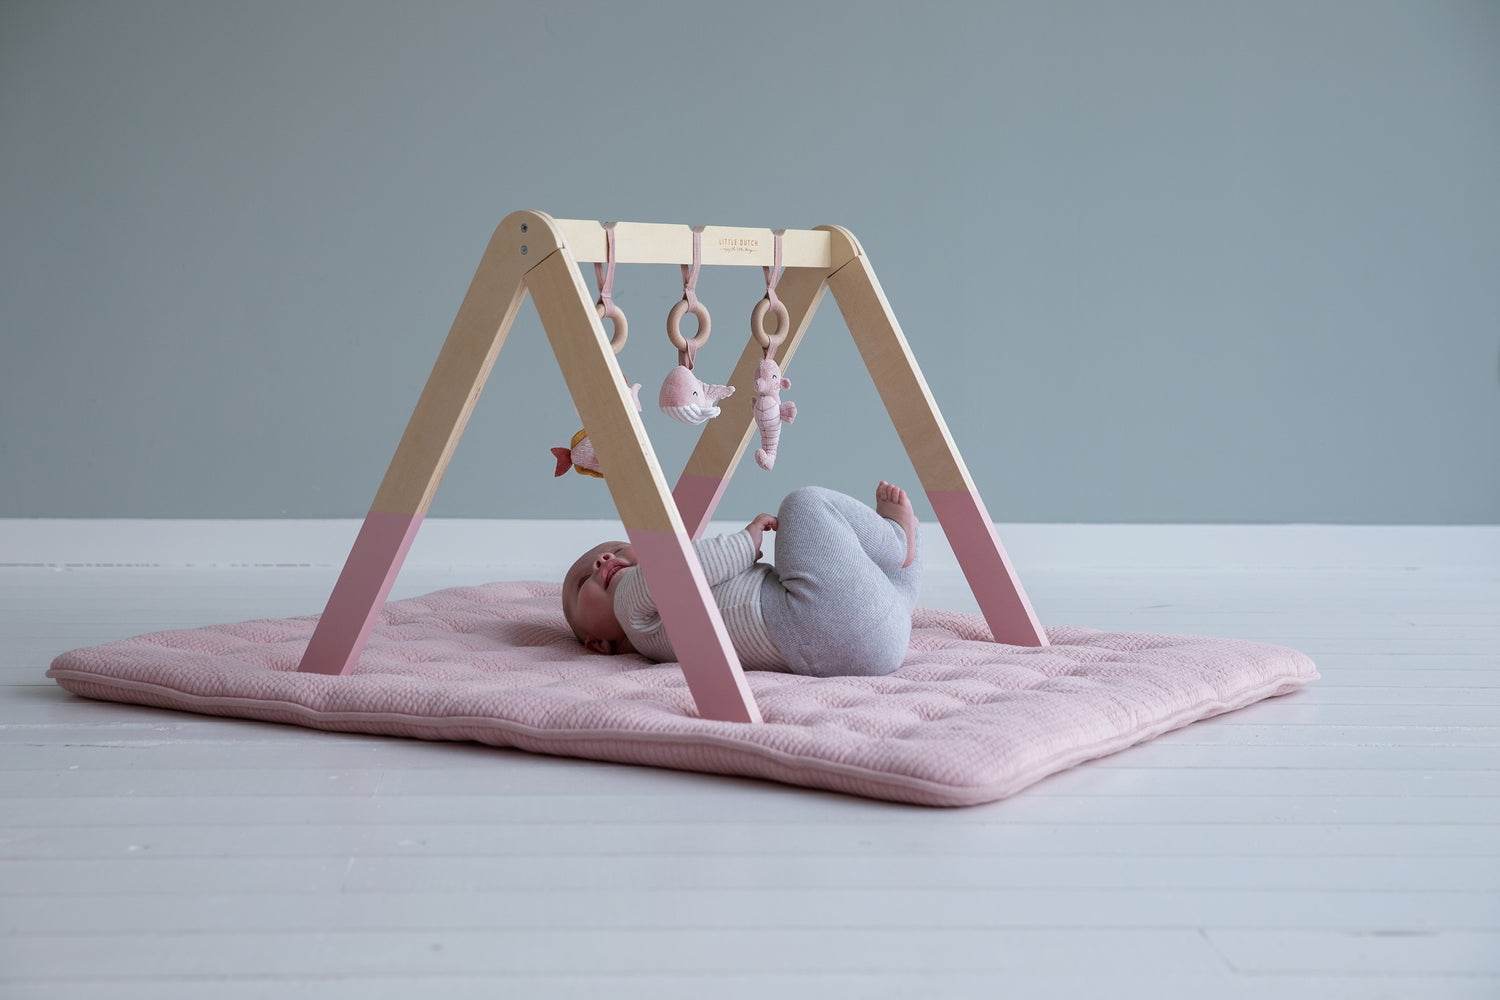 Wooden Play Gym - Pink